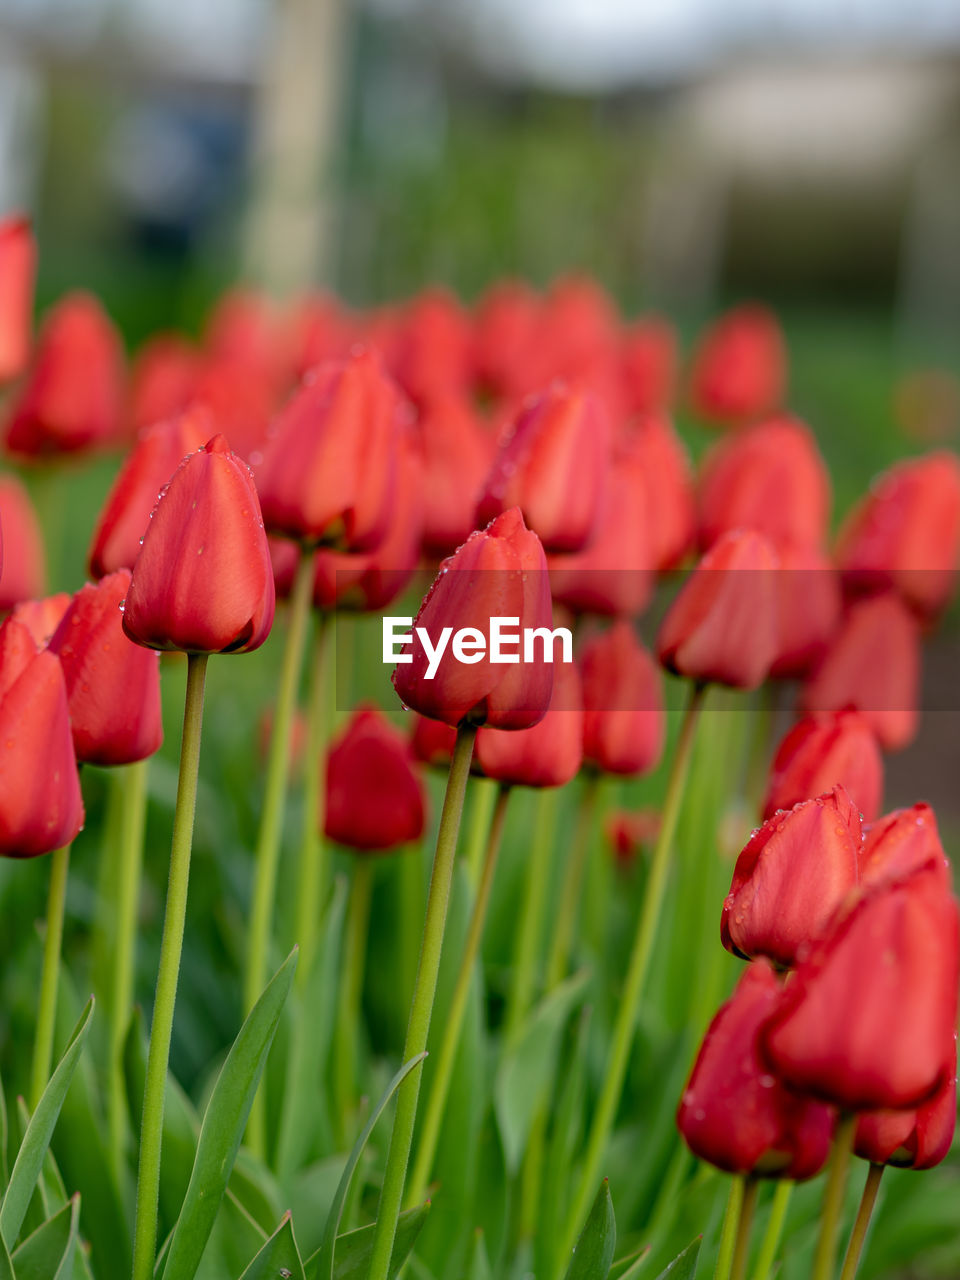 plant, flower, flowering plant, beauty in nature, freshness, red, close-up, nature, growth, petal, fragility, flower head, focus on foreground, tulip, inflorescence, no people, springtime, outdoors, green, day, field, grass, land, selective focus, blossom, plant stem, pink